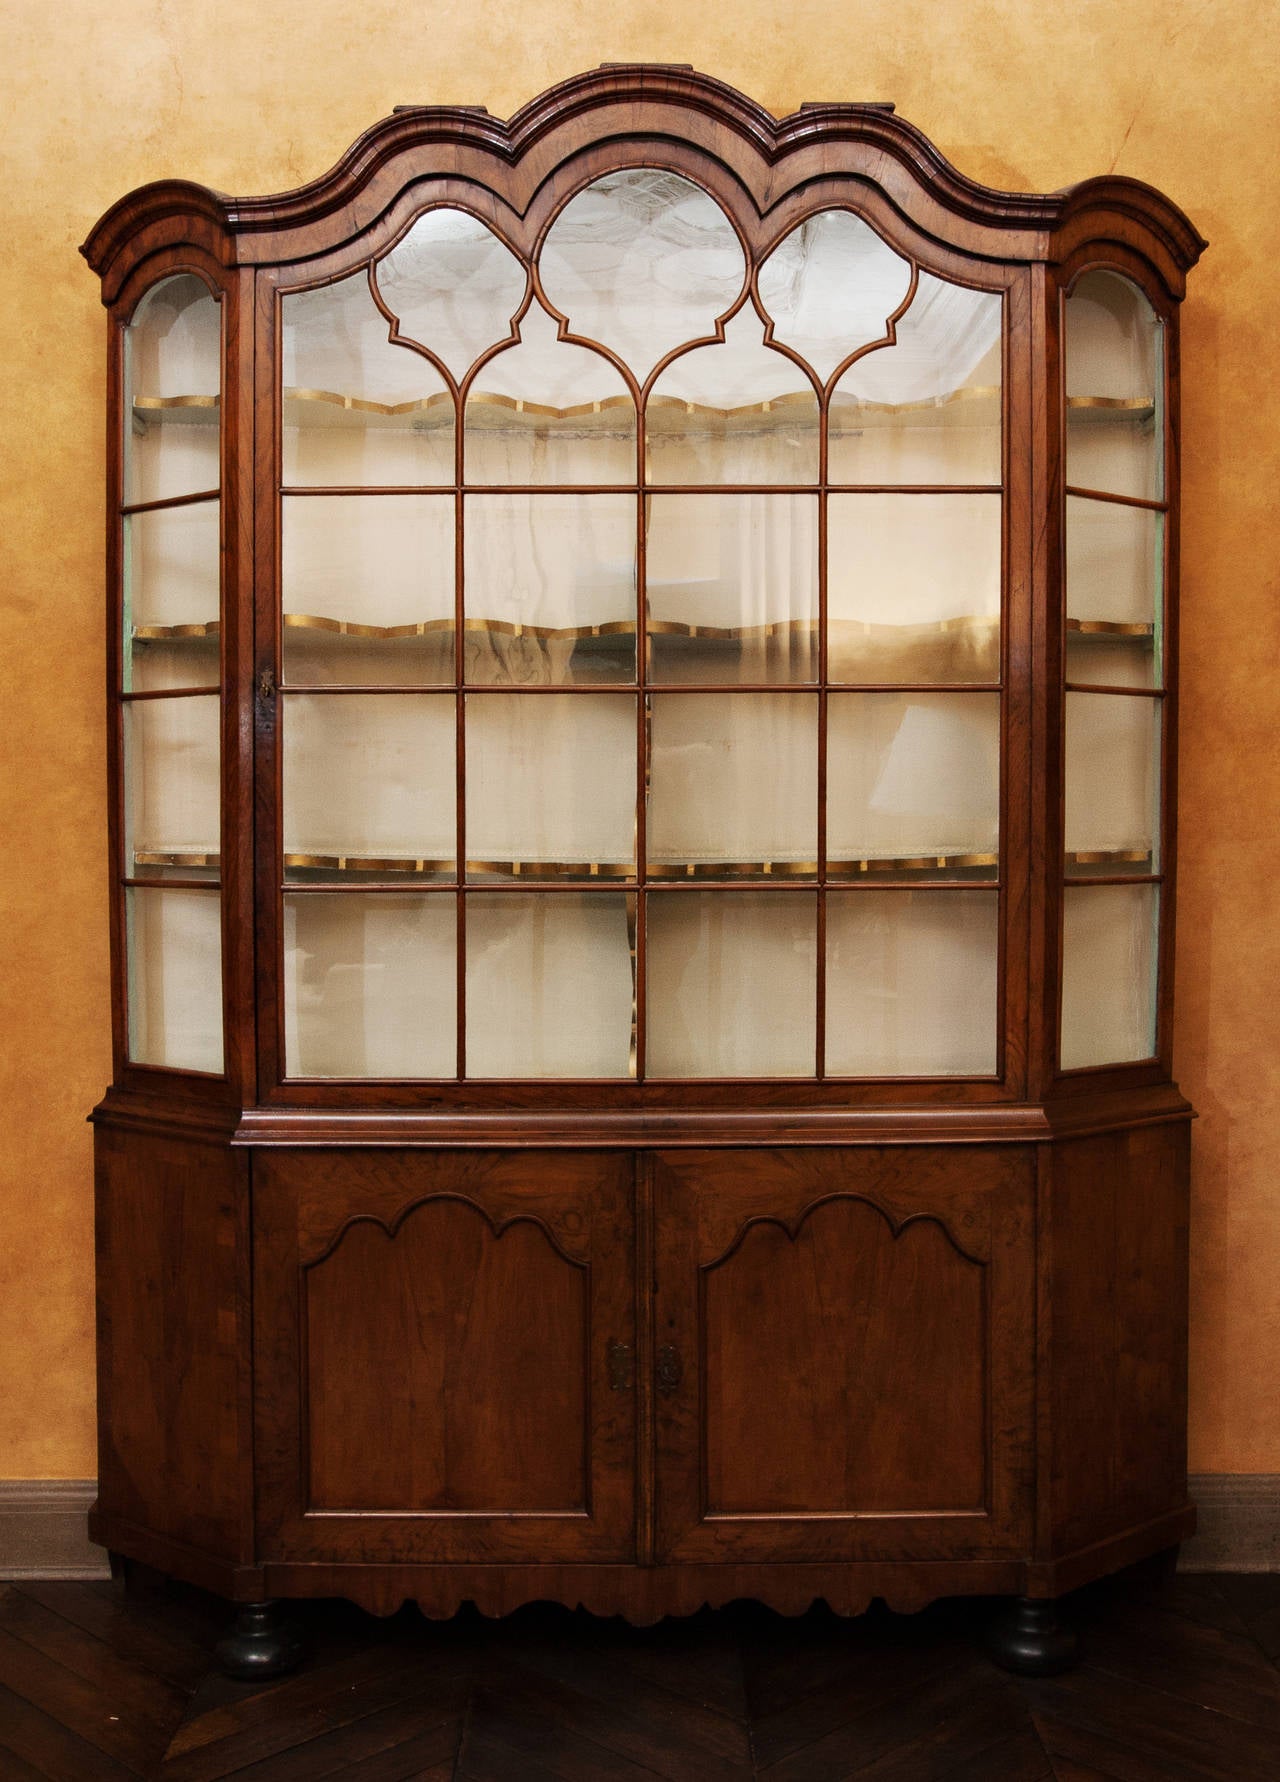 This is a beautiful 18th Century, circa 1720, Dutch Burl Walnut Breakfront with one single door that has the original glass in the panes.  It has three scalloped shelves with gold trim behind a single glass door with lock and key and has an